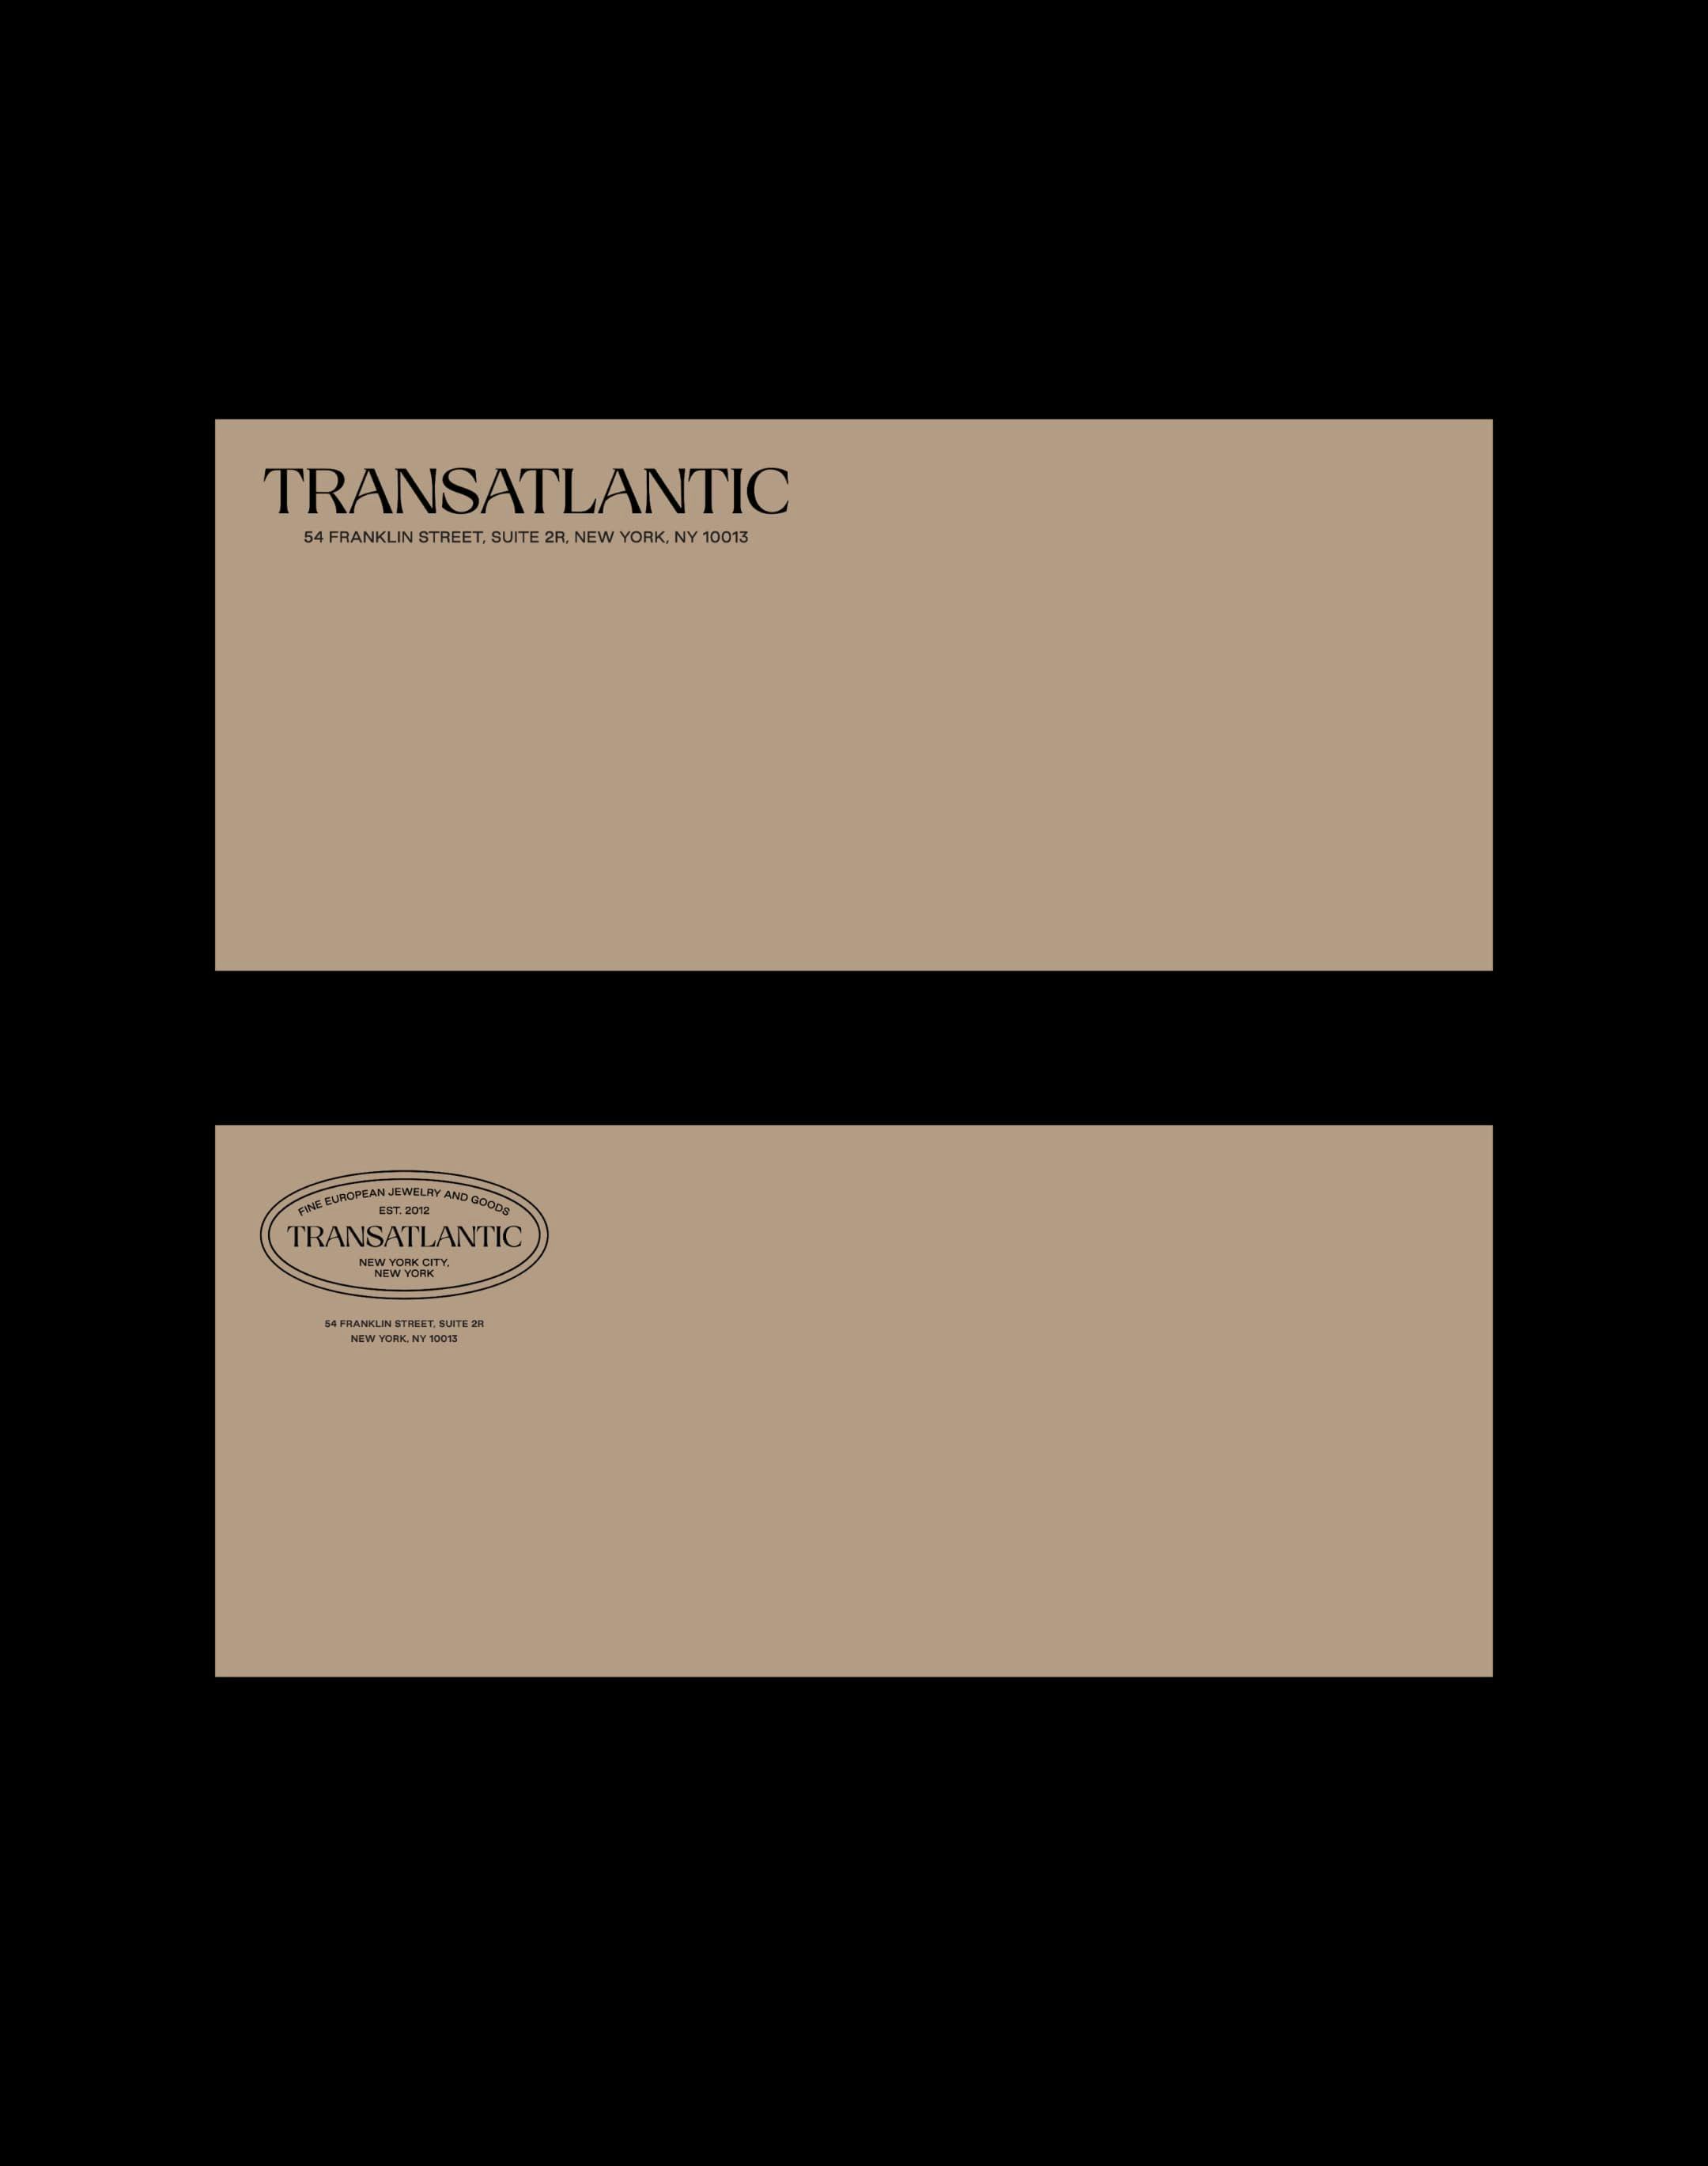 Brand identity and packaging design of Transatlantic Jewels by View Source.